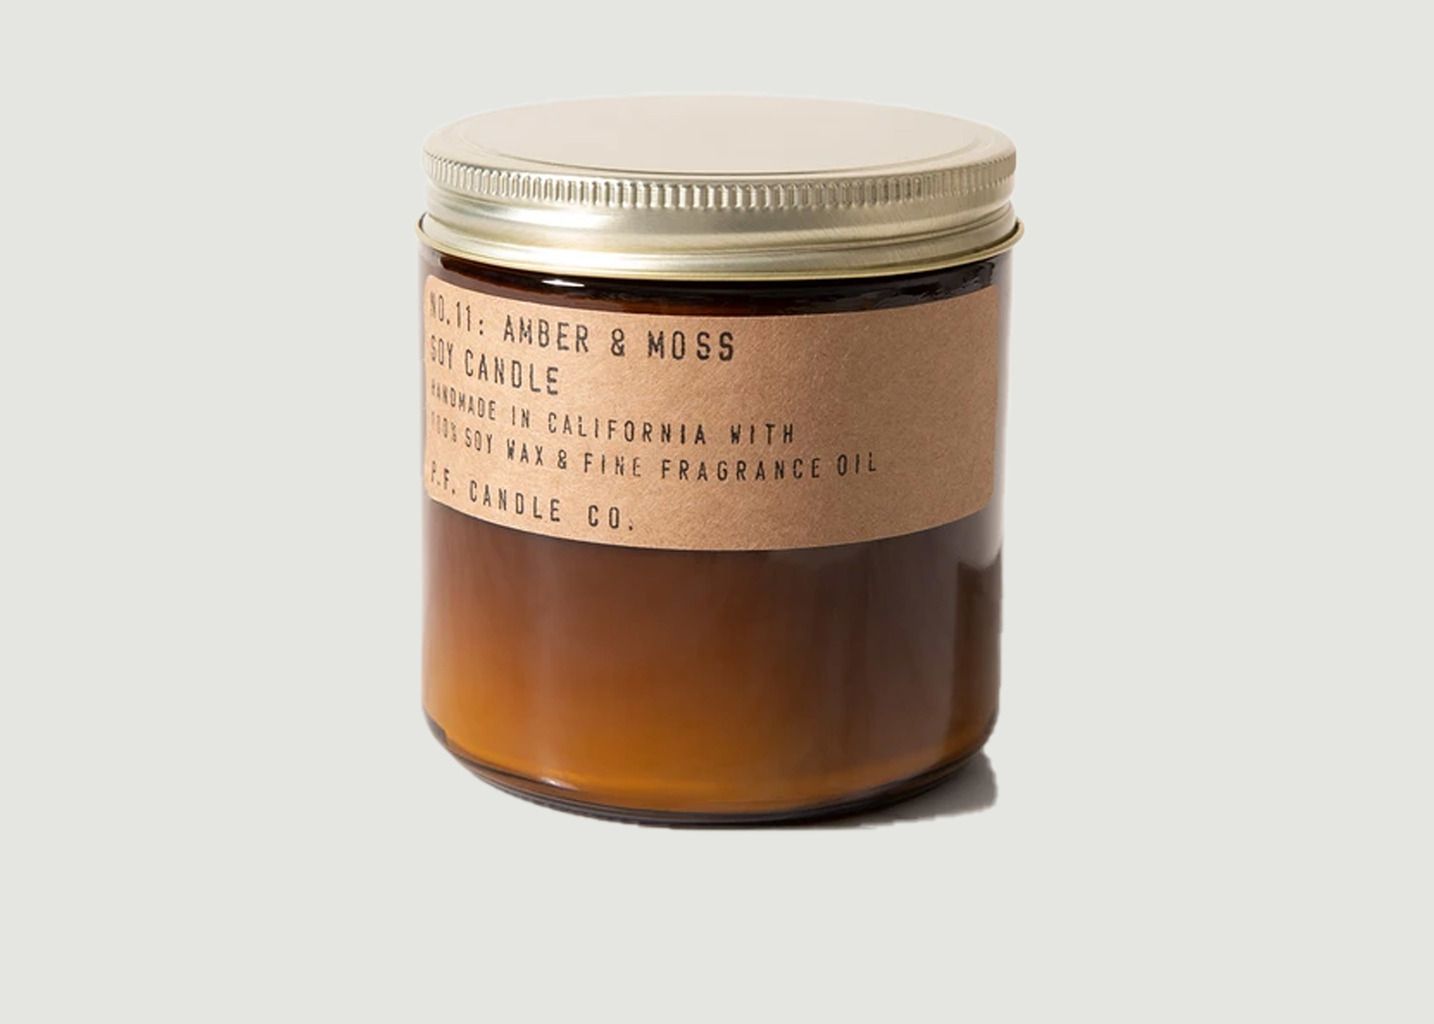 Kerze n°11 Amber Moss groß - P.F. Candle CO.